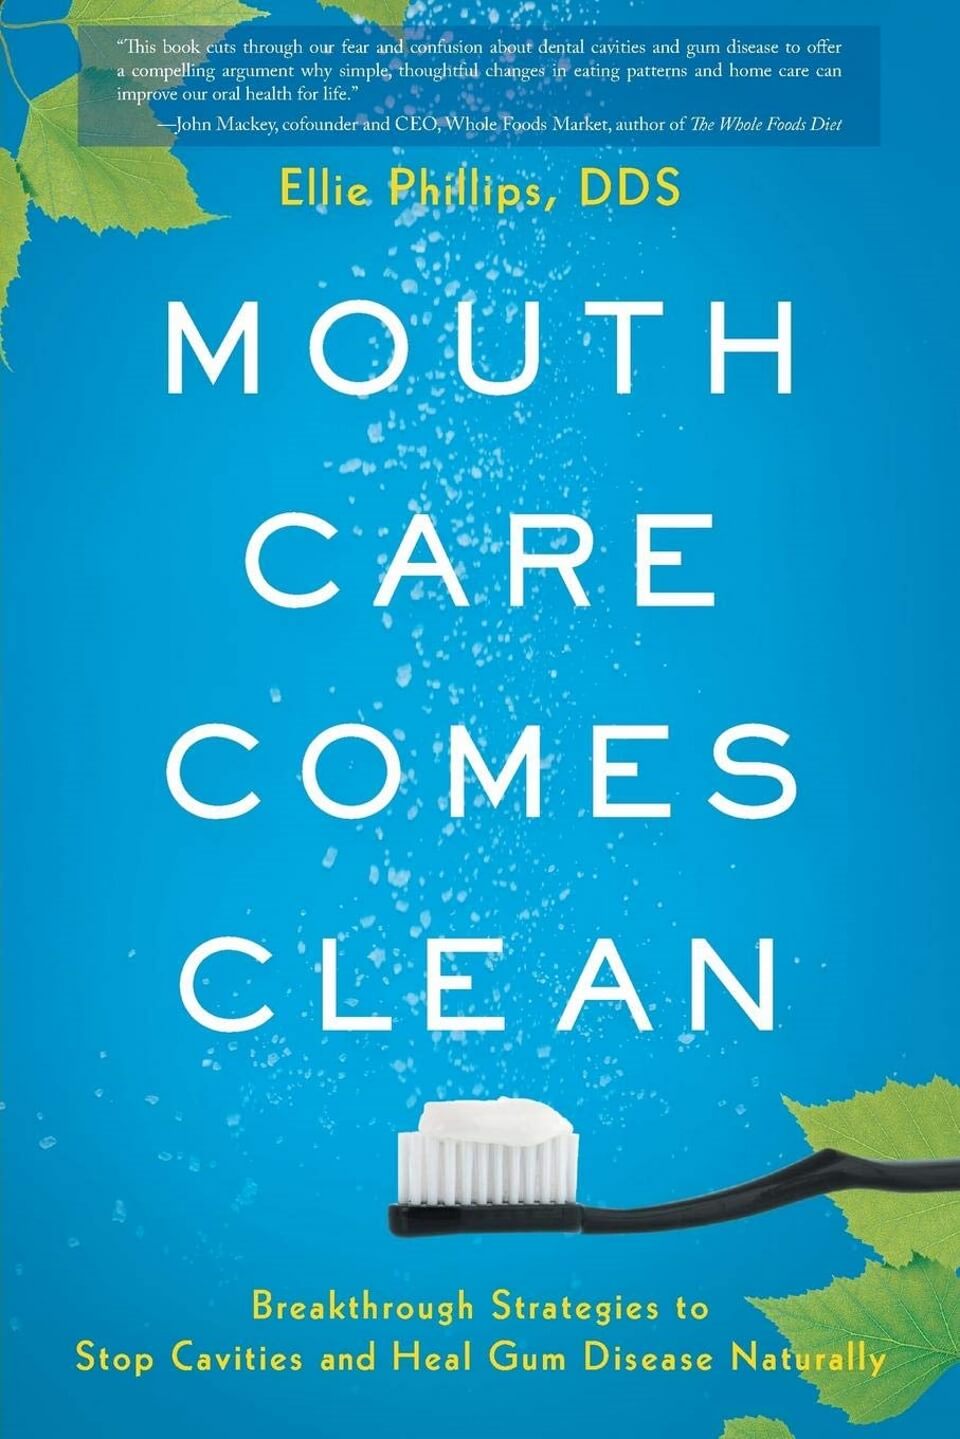 Mouth Care Comes Clean by Ellie Phillips DDS